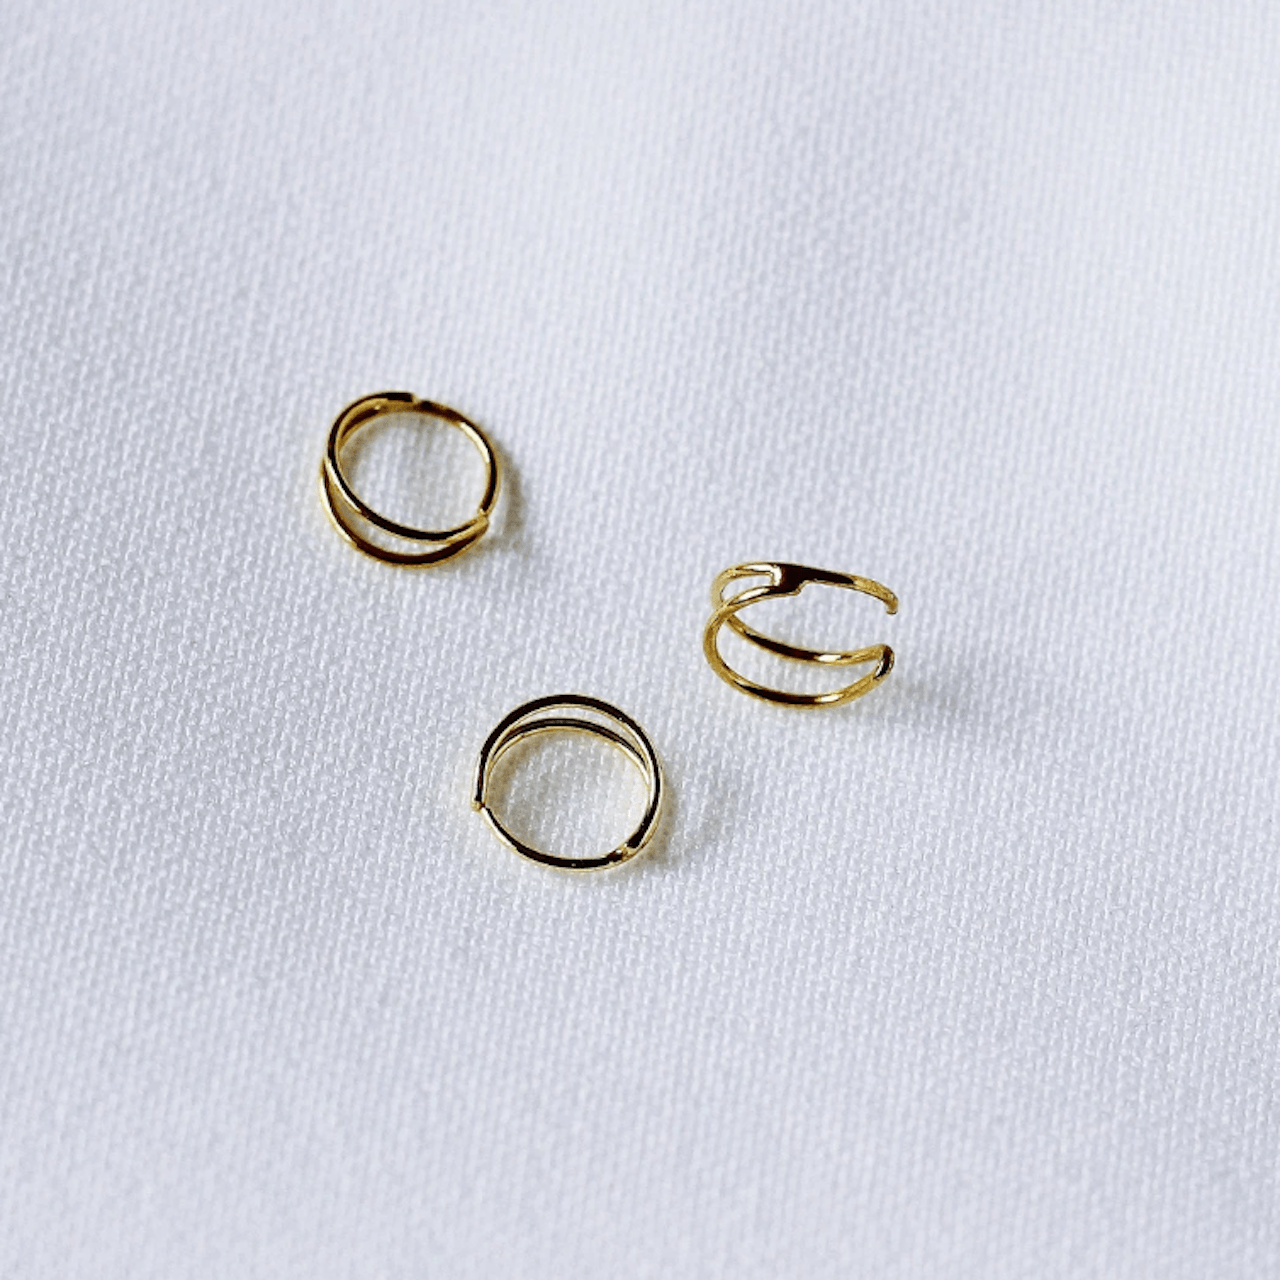 Body CAC 5PCS-16G(1.2mm) Gold Hinged Clicker Titanium Nose Ring  Hypoallergenic Titanium Full Hoops, Implant Grade Clasp Segment Sleeper  Seamless Earrings Helix Piercing For Women : Amazon.co.uk: Fashion